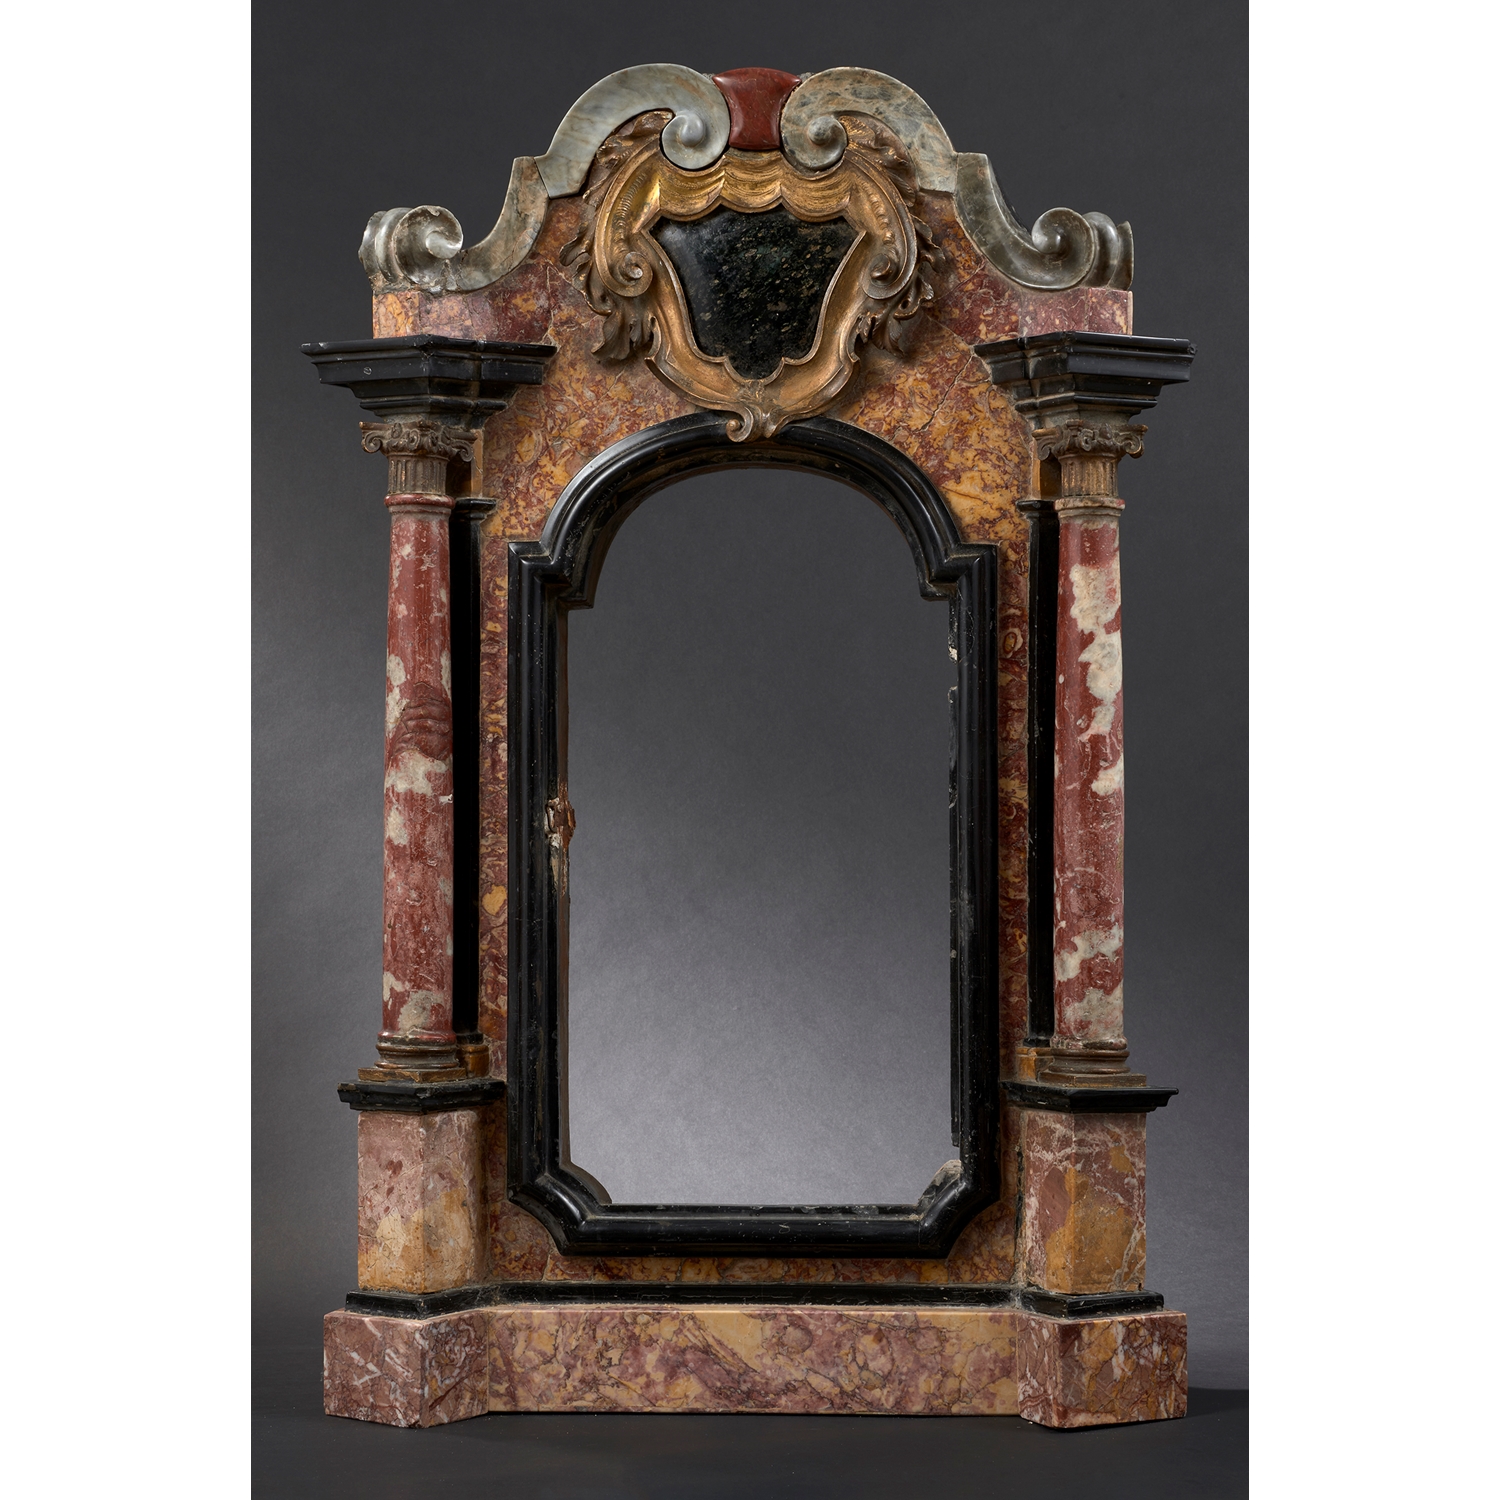 RARE BAROQUE TABERNACLE WITH BELGIUM BLACK MARBLE ORNATED WITH MARQUETRY OF RARE MARBLES AND GILT BRONZE   ITALY 17th CENTURY